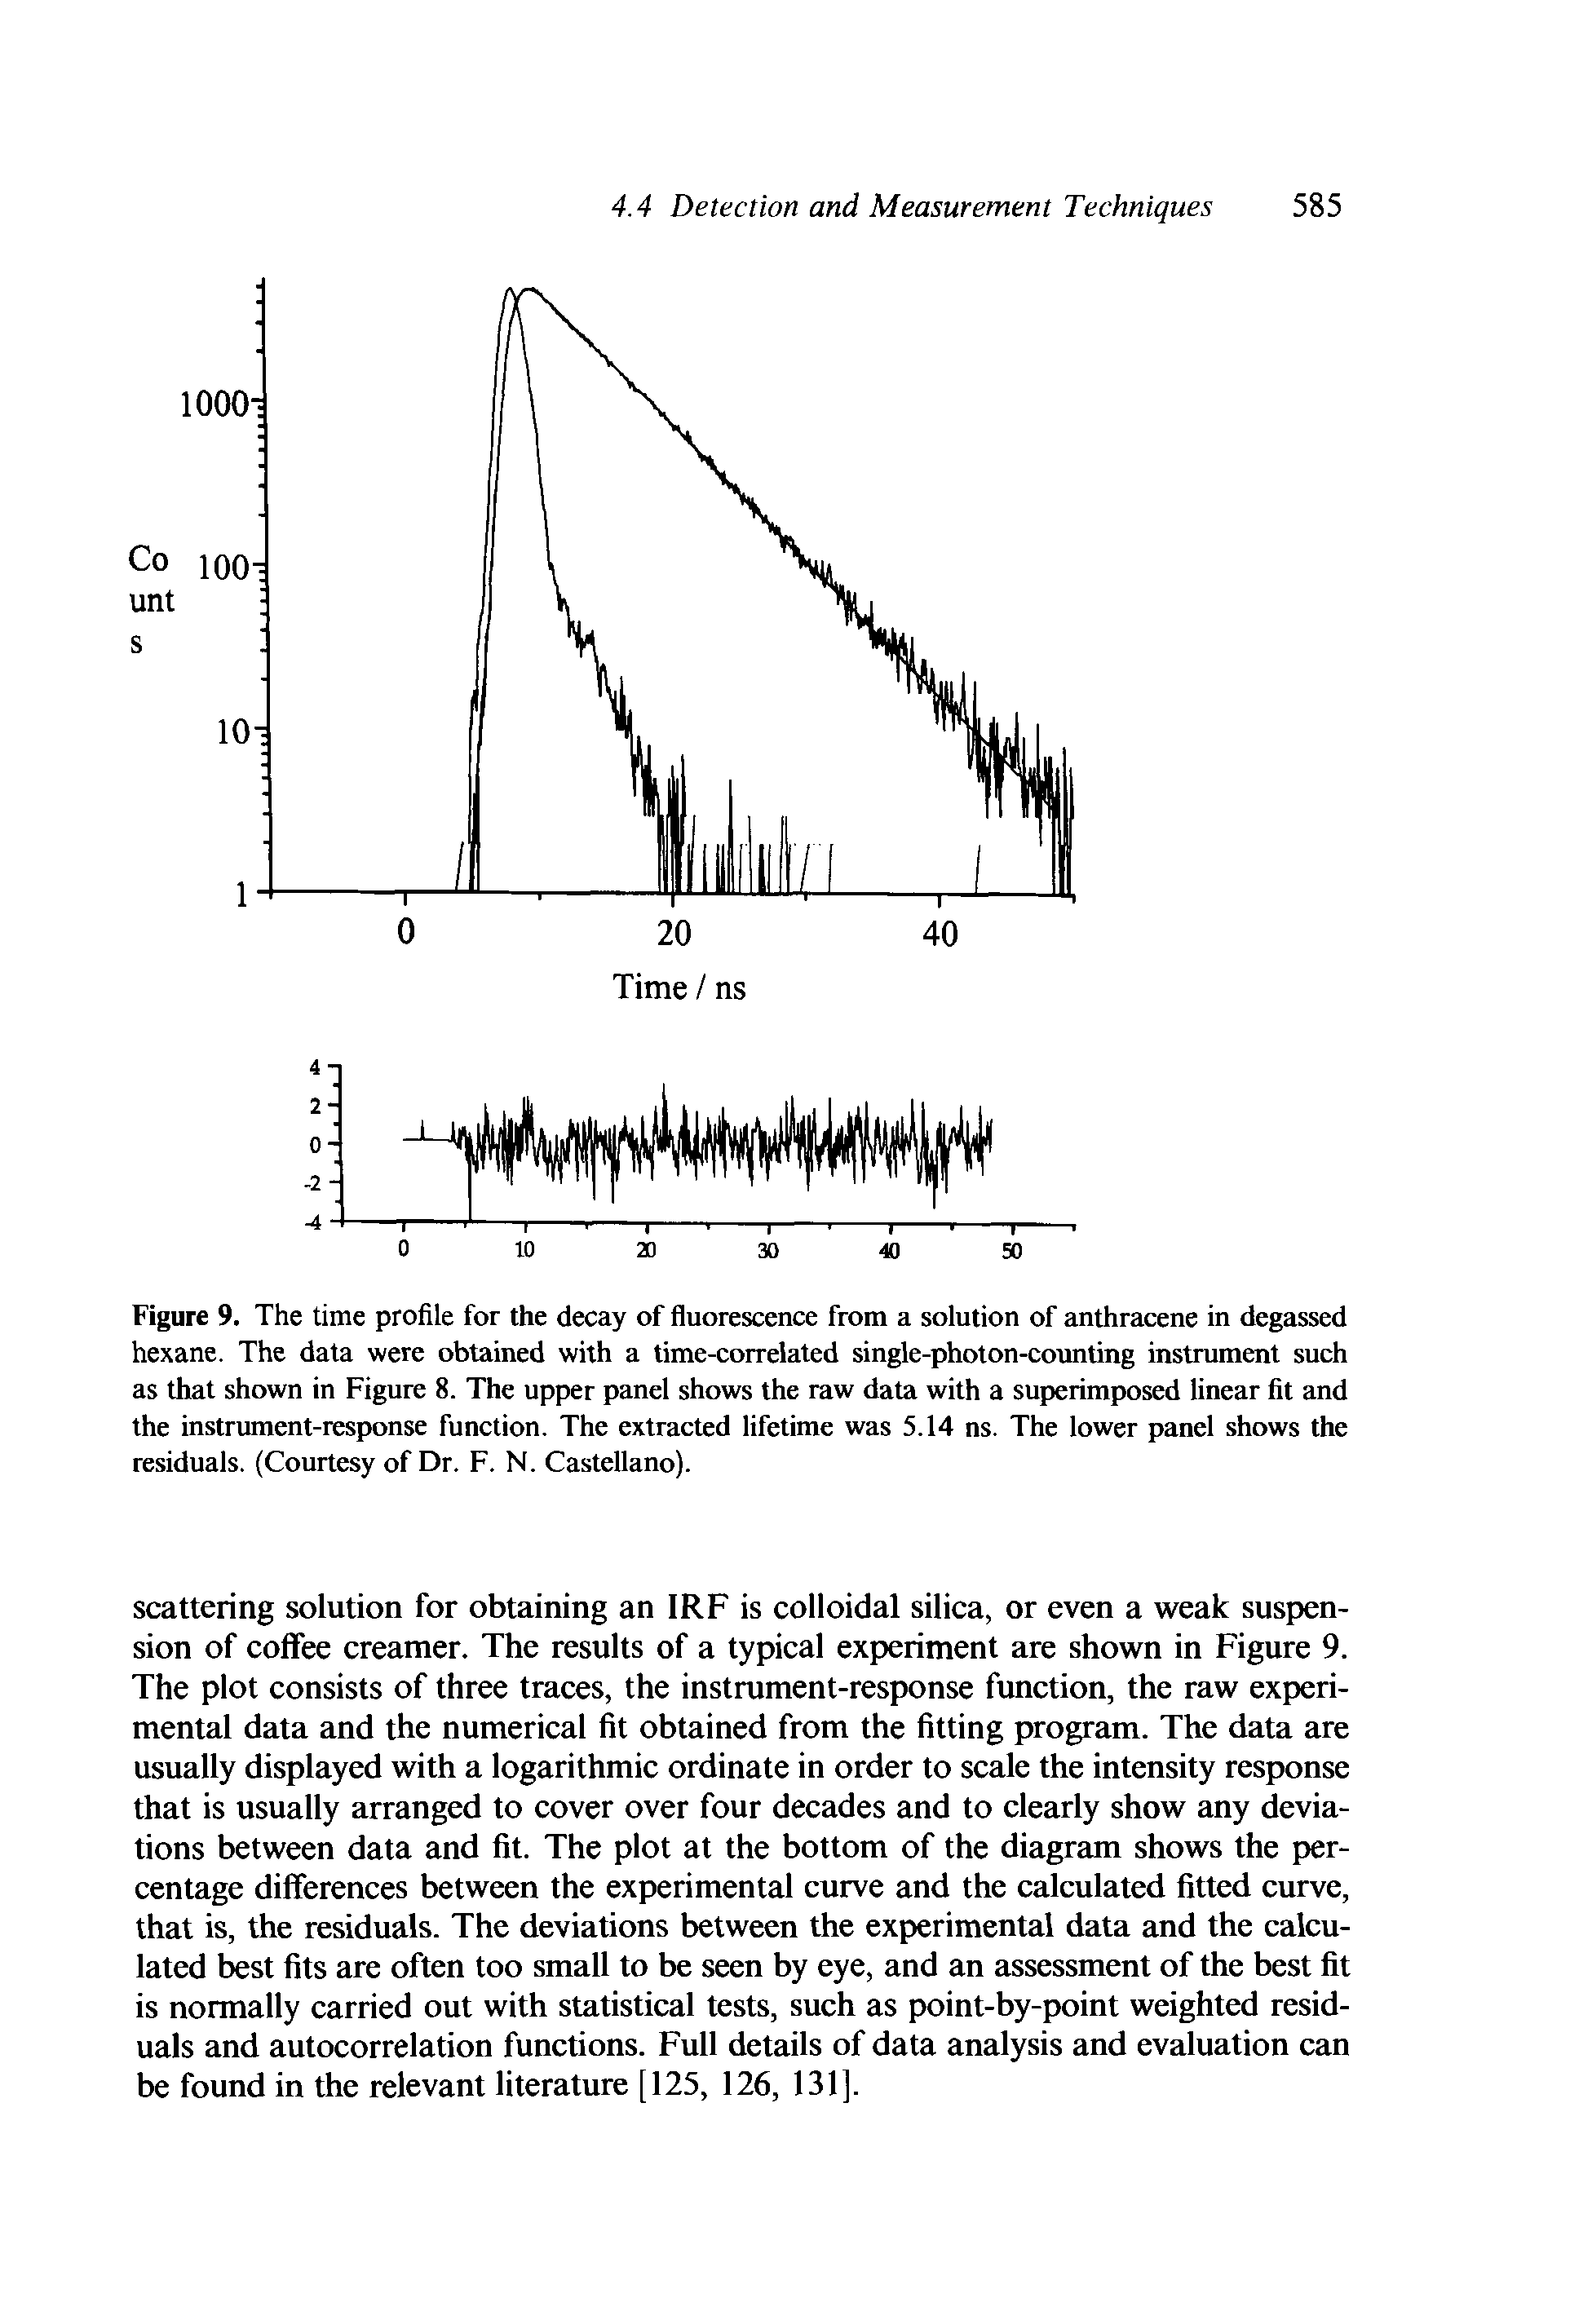 Figure 9. The time profile for the decay of fluorescence from a solution of anthracene in degassed hexane. The data were obtained with a time-correlated single-photon-counting instrument such as that shown in Figure 8. The upper panel shows the raw data with a superimposed linear fit and the instrument-response function. The extracted lifetime was 5.14 ns. The lower panel shows the residuals. (Courtesy of Dr. F. N. Castellano).